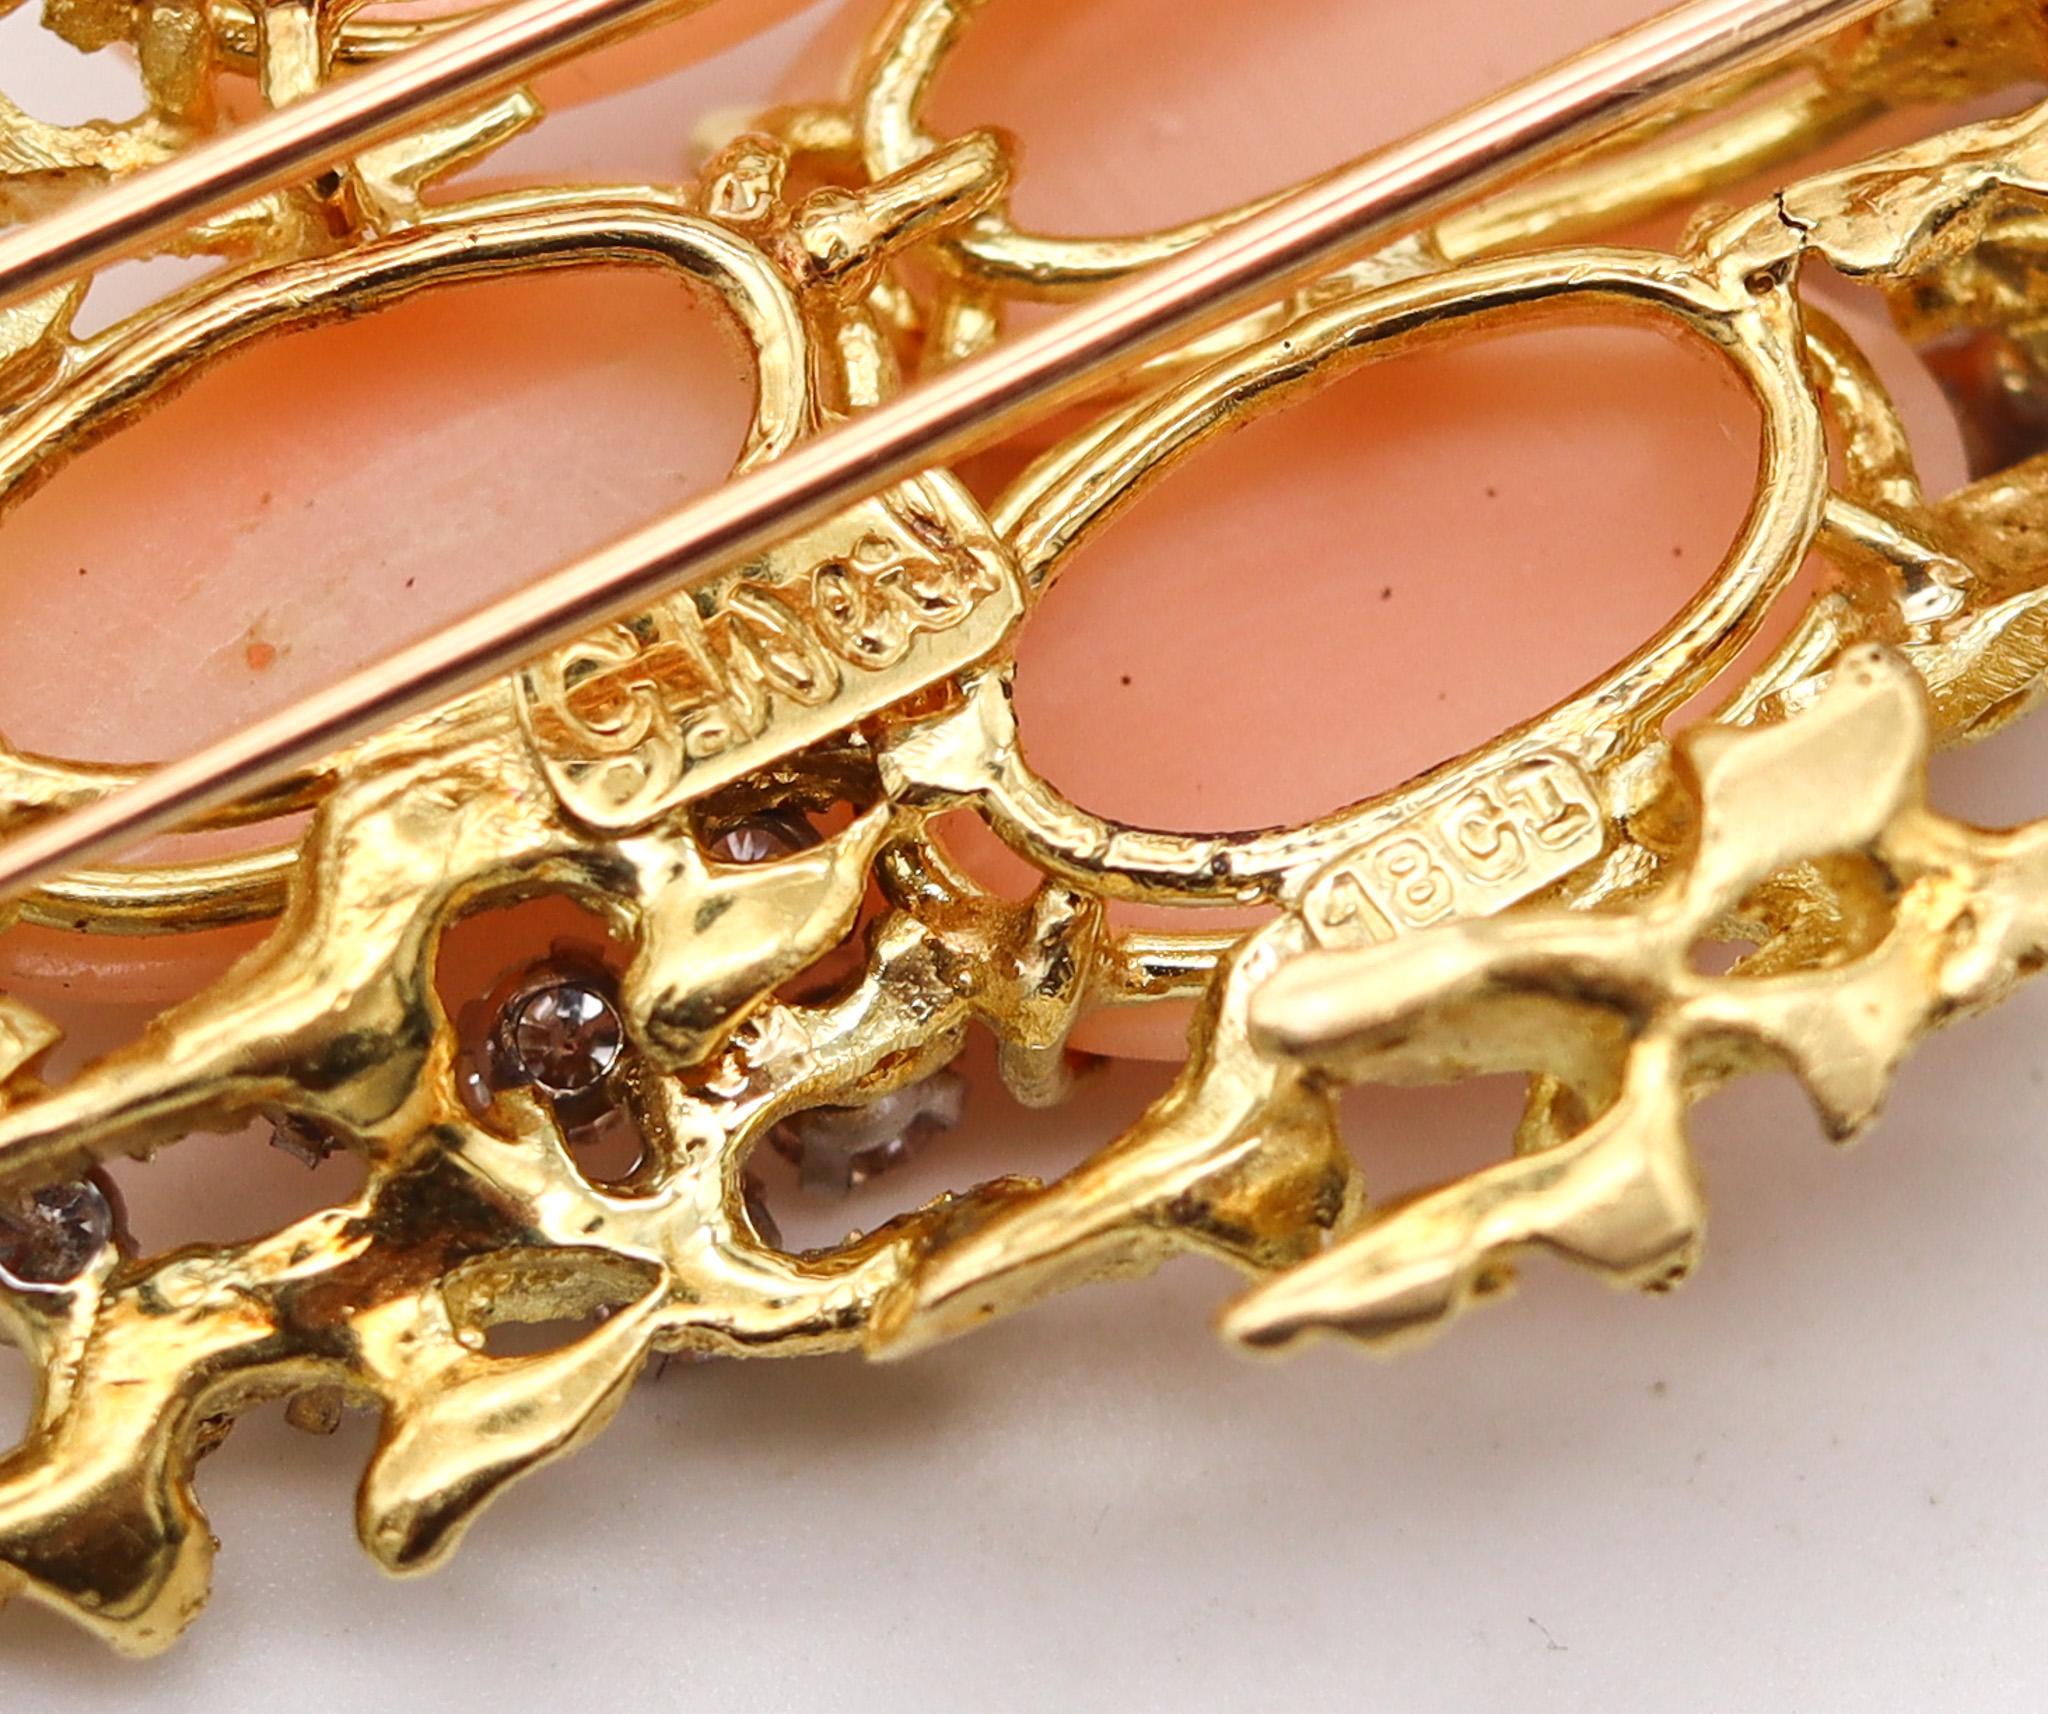 Brilliant Cut George Weil 1960 Brutalist Pendant Brooch In 18Kt Gold Diamonds And Corals For Sale